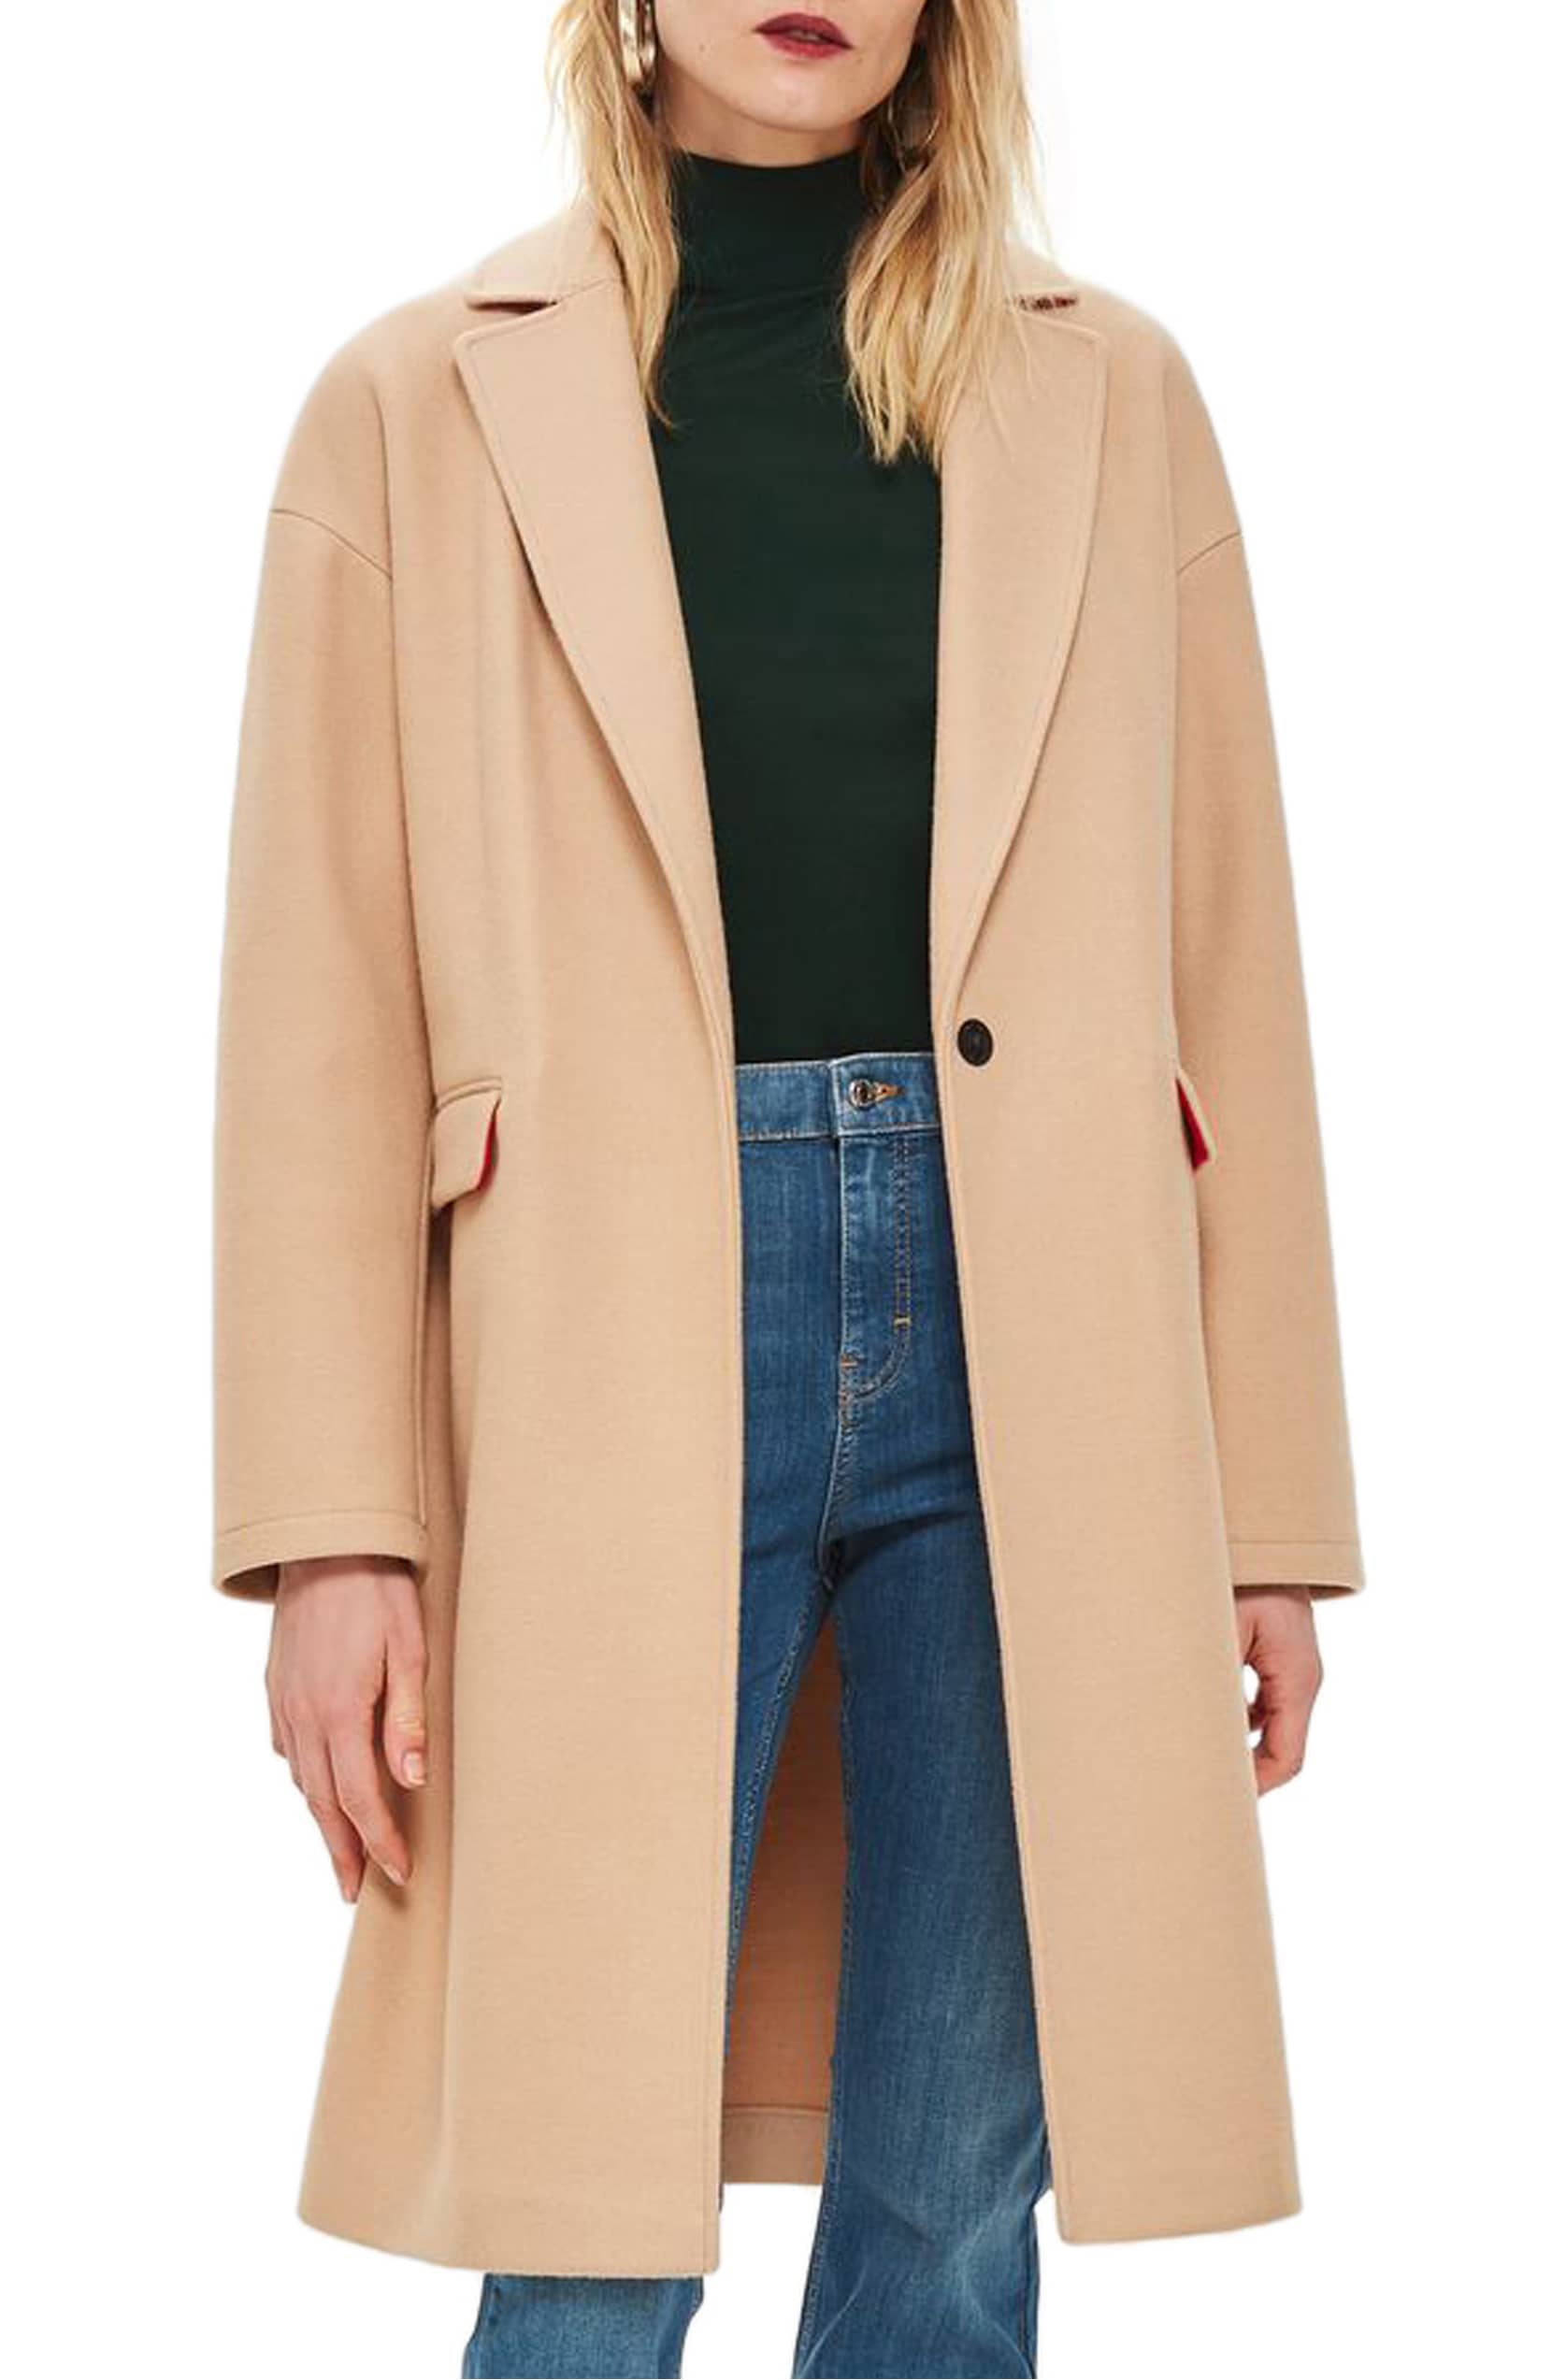 Nordstrom Sale: Check Out Our Favorite Topshop Coat